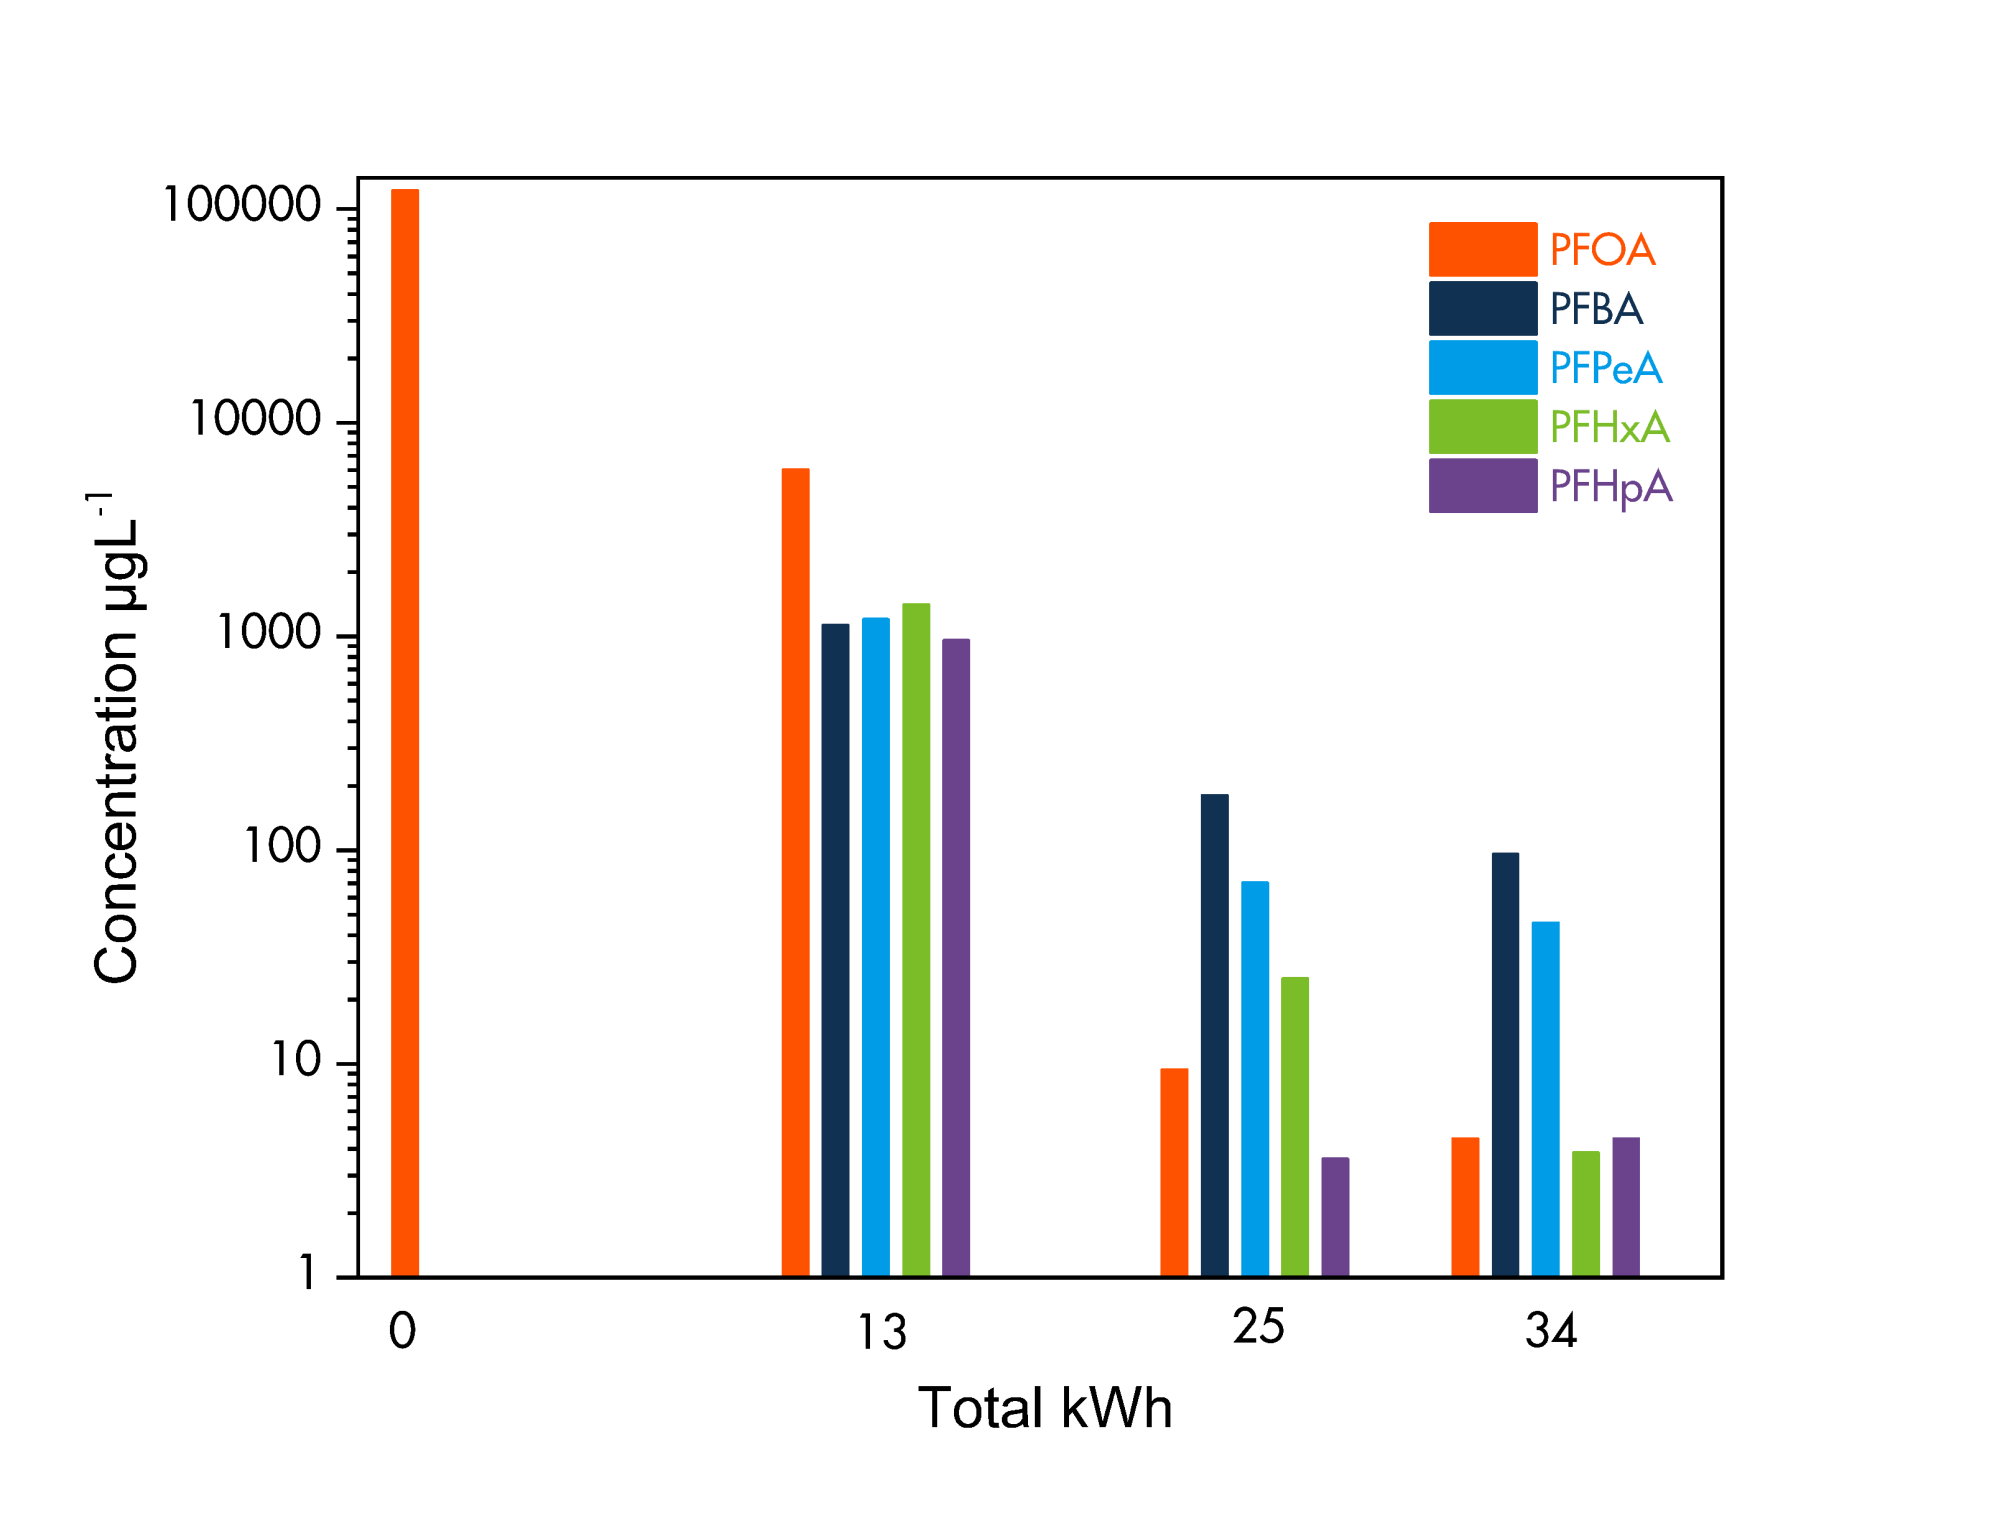 IMAGE 5: High current density electrochemical oxidation of PFOA, showing conversion into short chain PFAS species, and then with further cycles, these remaining short chain species are also broken down. The initial PFOA is reduced from > 100,000 µg/L to < 10 µg/L within 34 kWh of energy. (Image courtesy of 2023 Lummus Technology)  